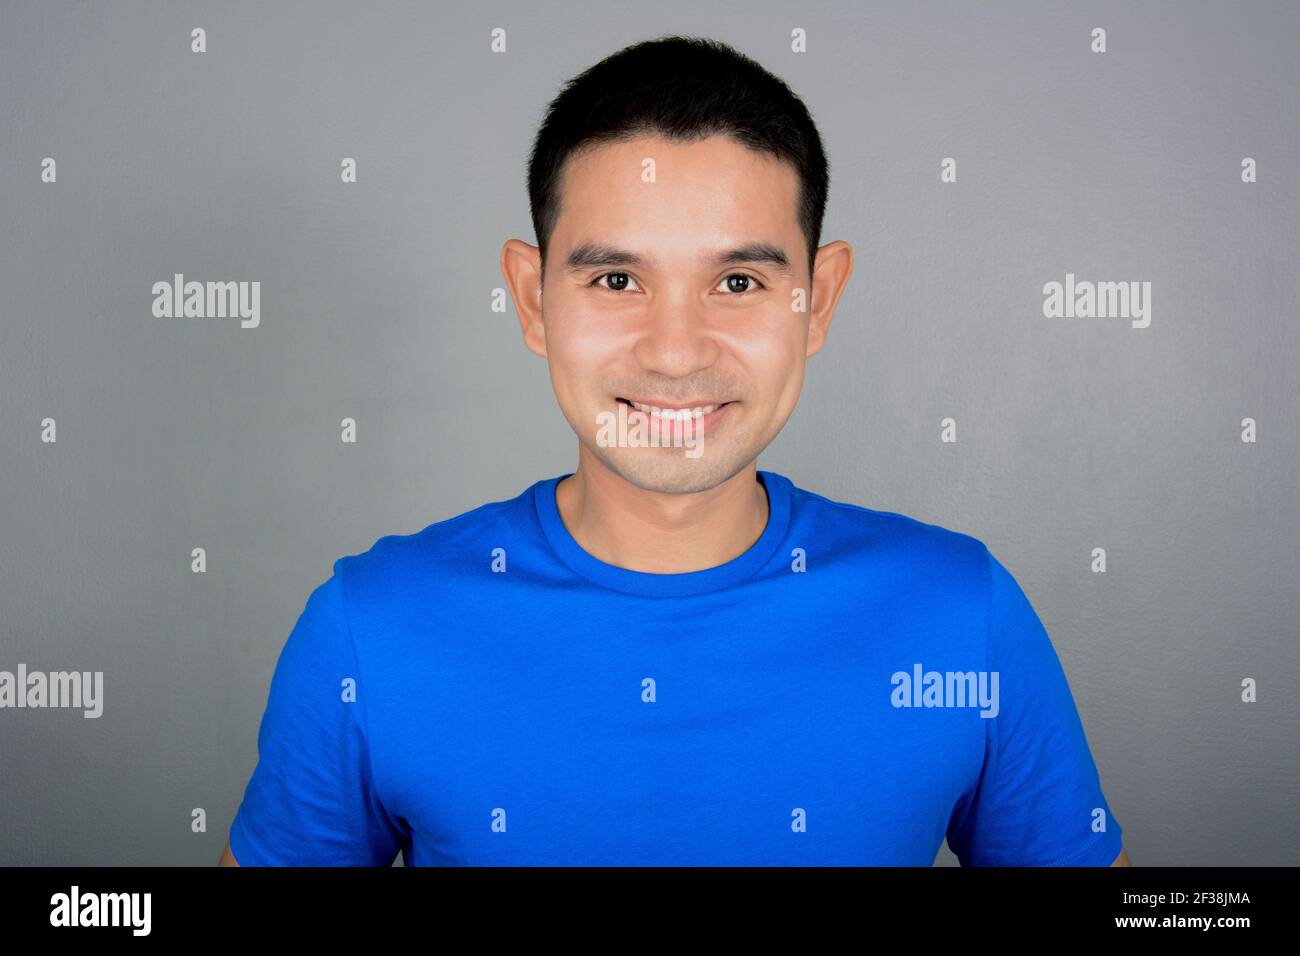 Friendly Asian man with smiling delighted face on light gray background Stock Photo